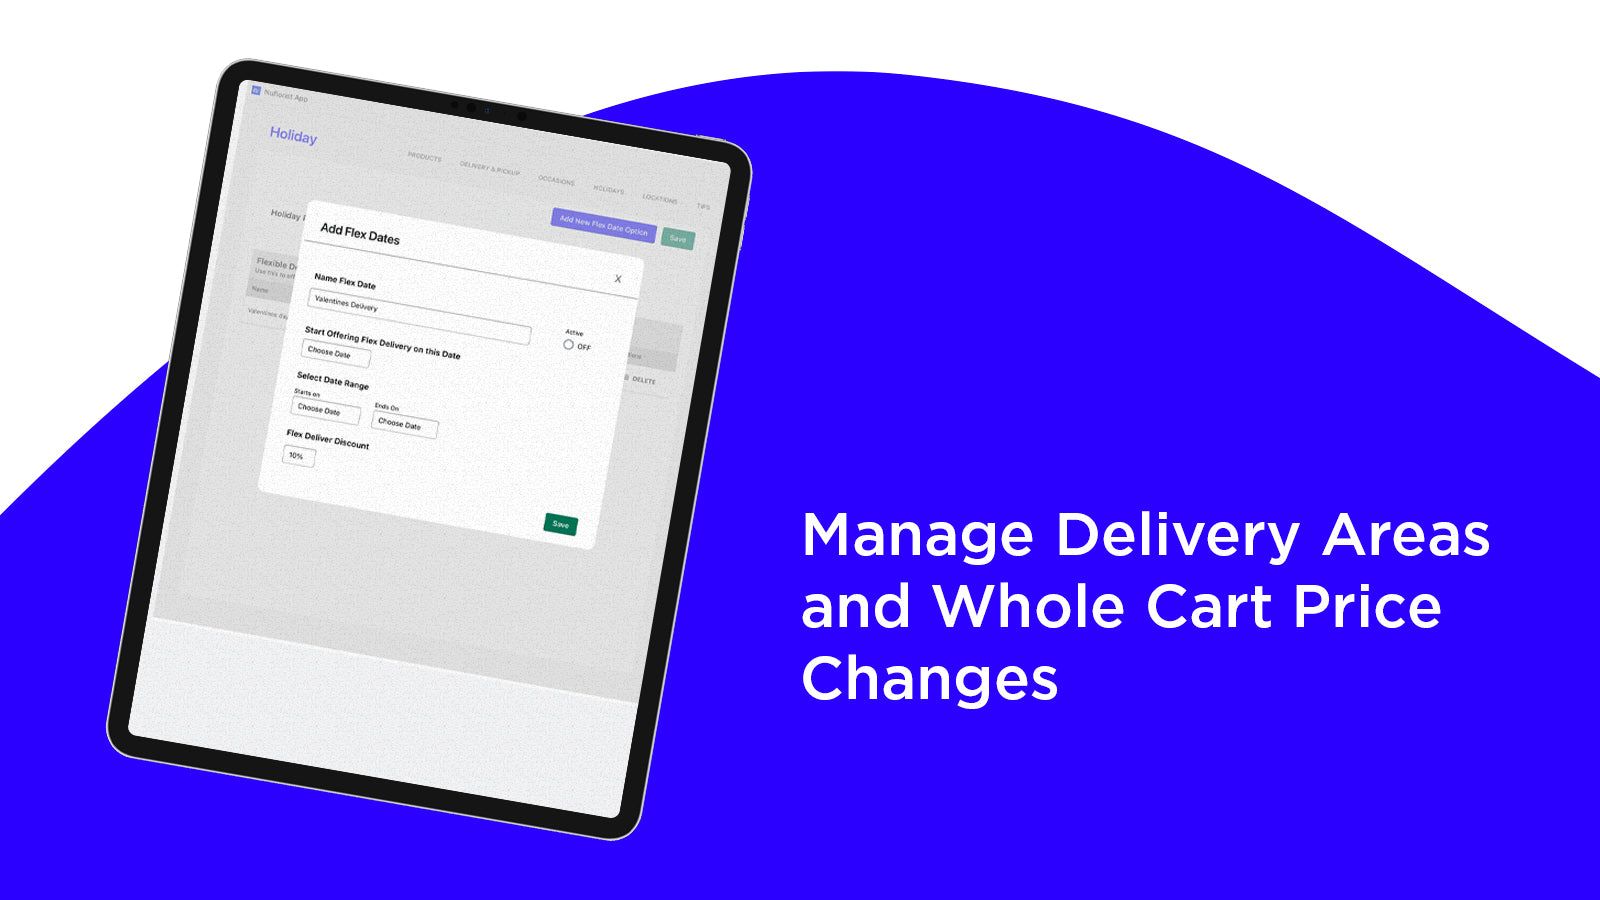 Manage Delivery areas and whole cart price changes